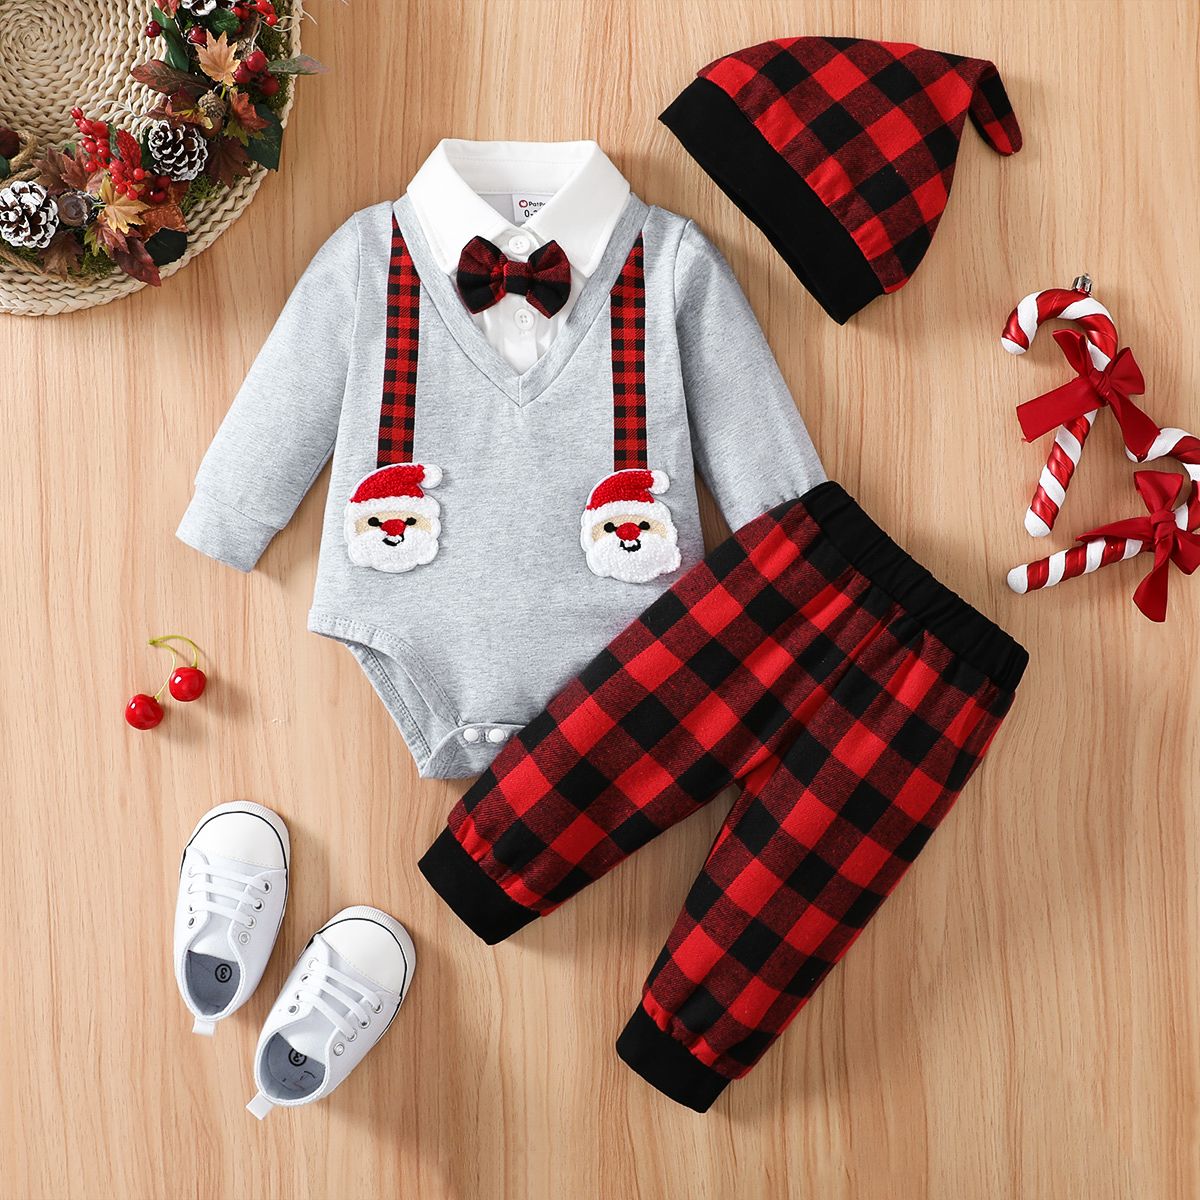 Christmas 3pcs Baby Boy 95% Cotton Long-sleeve Santa Badge Bow Tie Romper and Red Plaid Pants with H